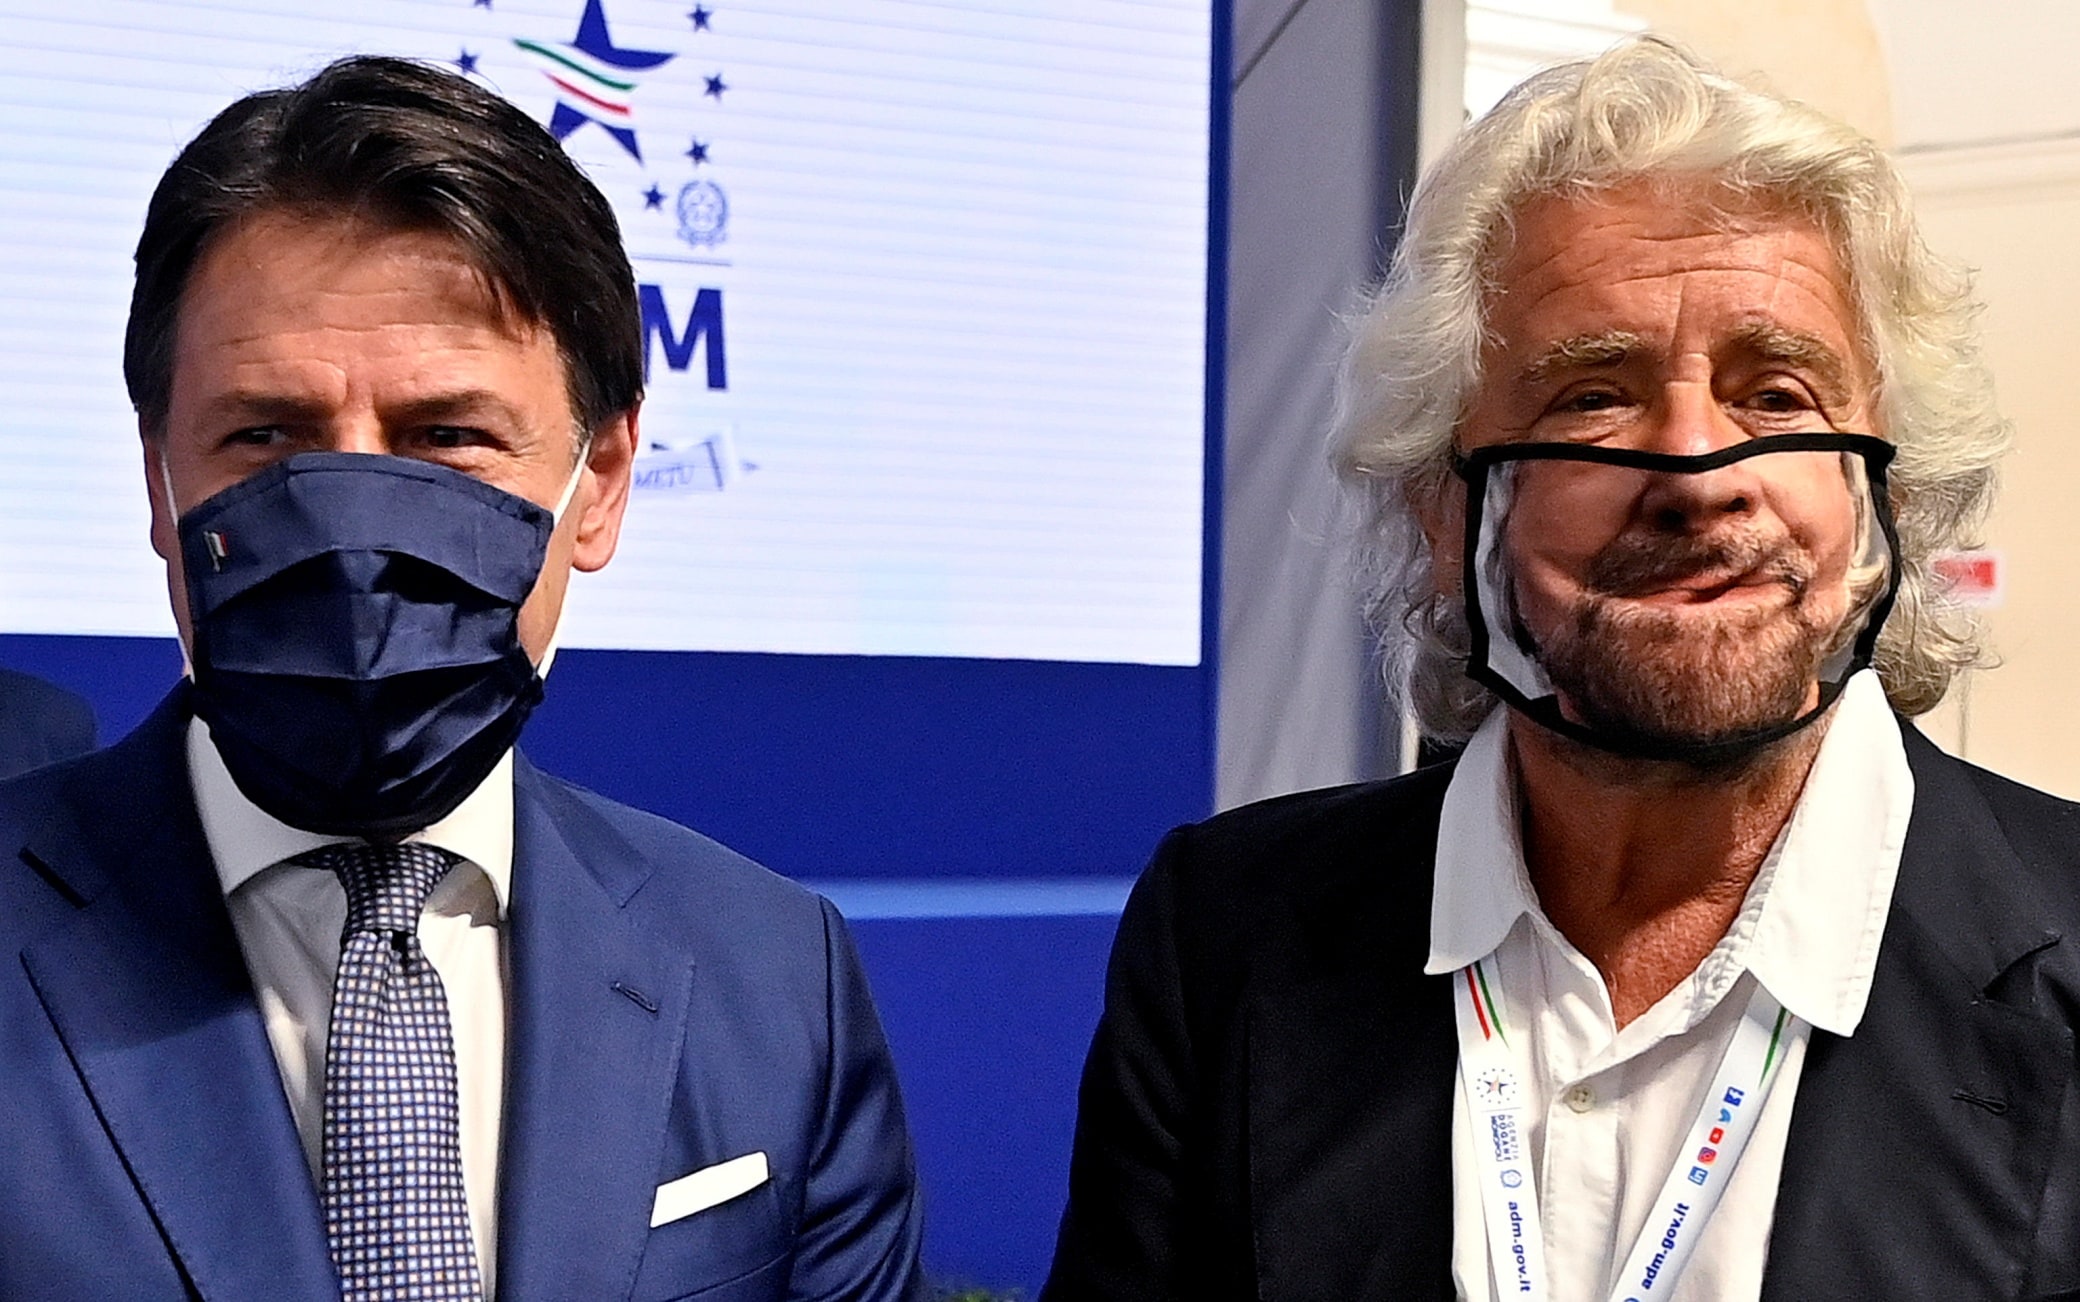 Chaos M5S, Grillo: “Complicated situation, but sentences are respected. Now confrontation”